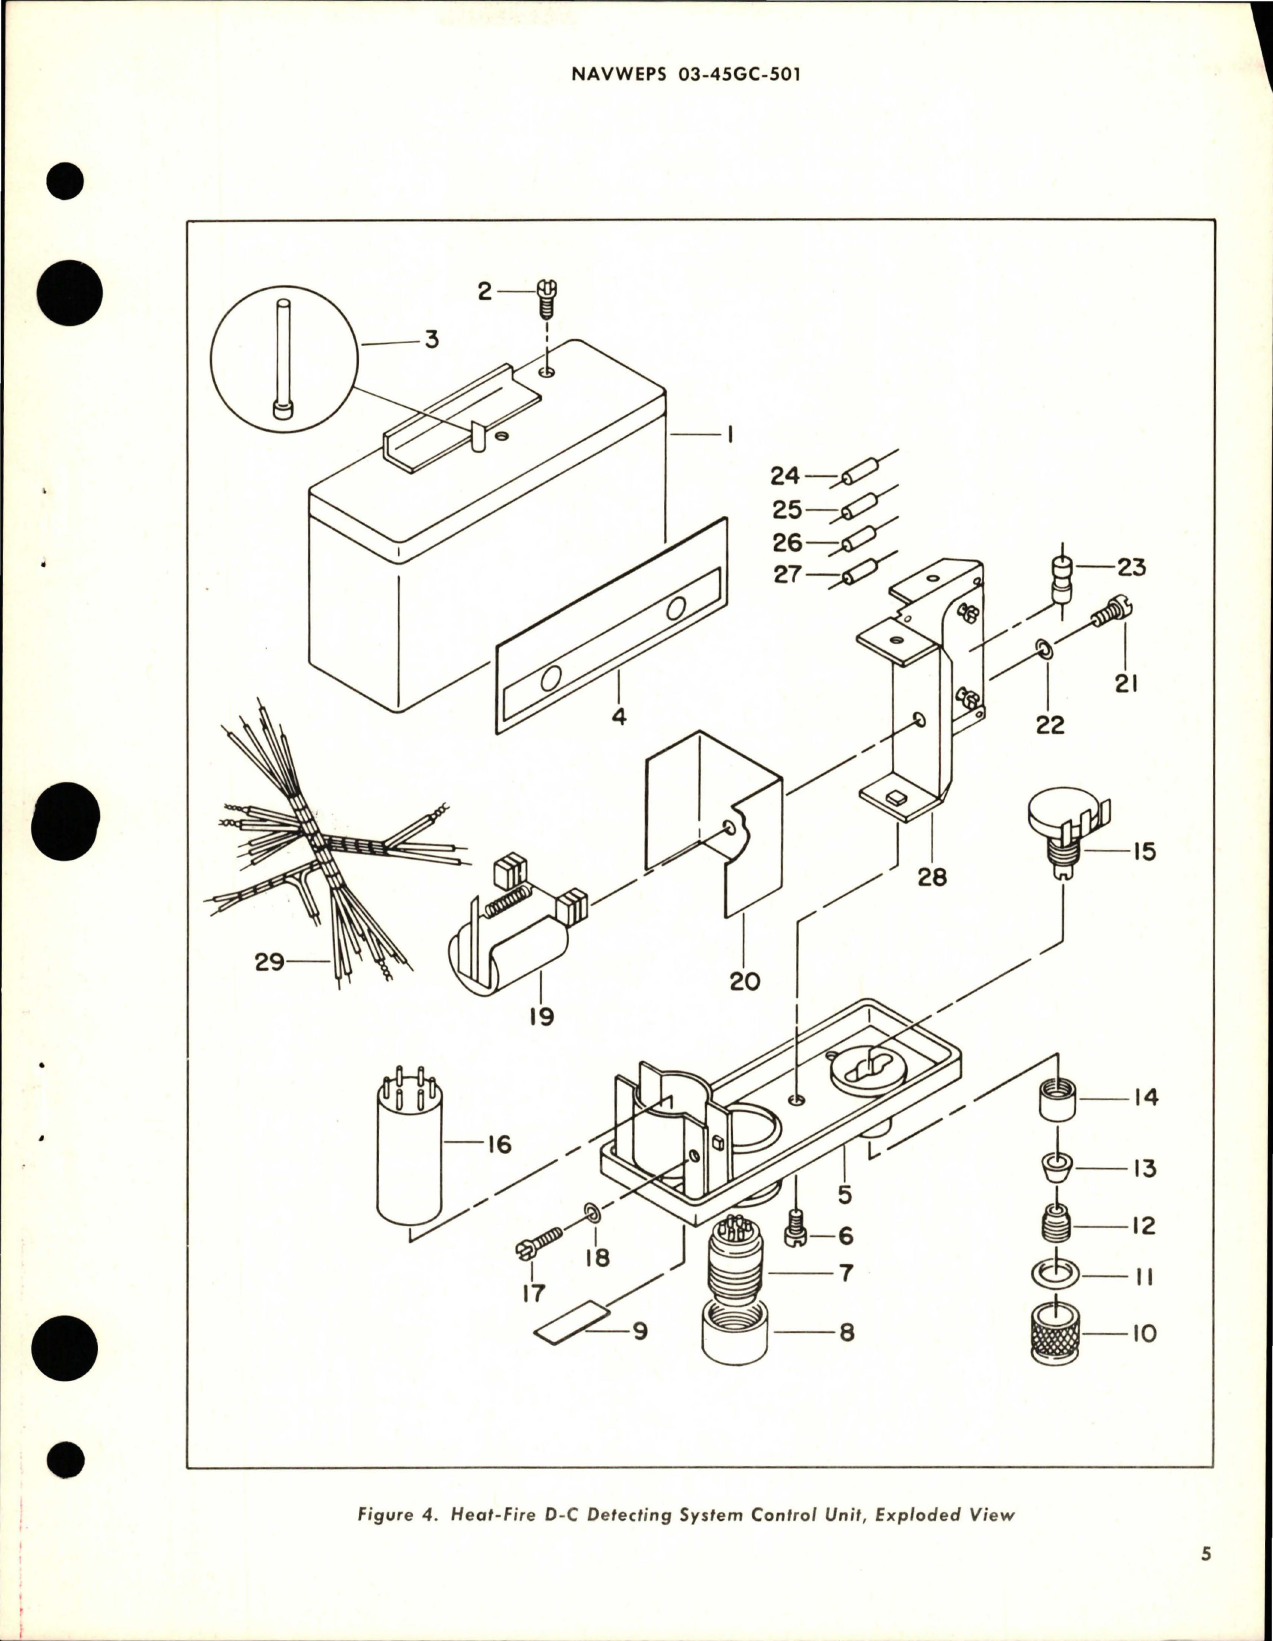 Sample page 5 from AirCorps Library document: Overhaul Instructions with Parts Breakdown for Heat-Fire D-C Detecting System Control Unit